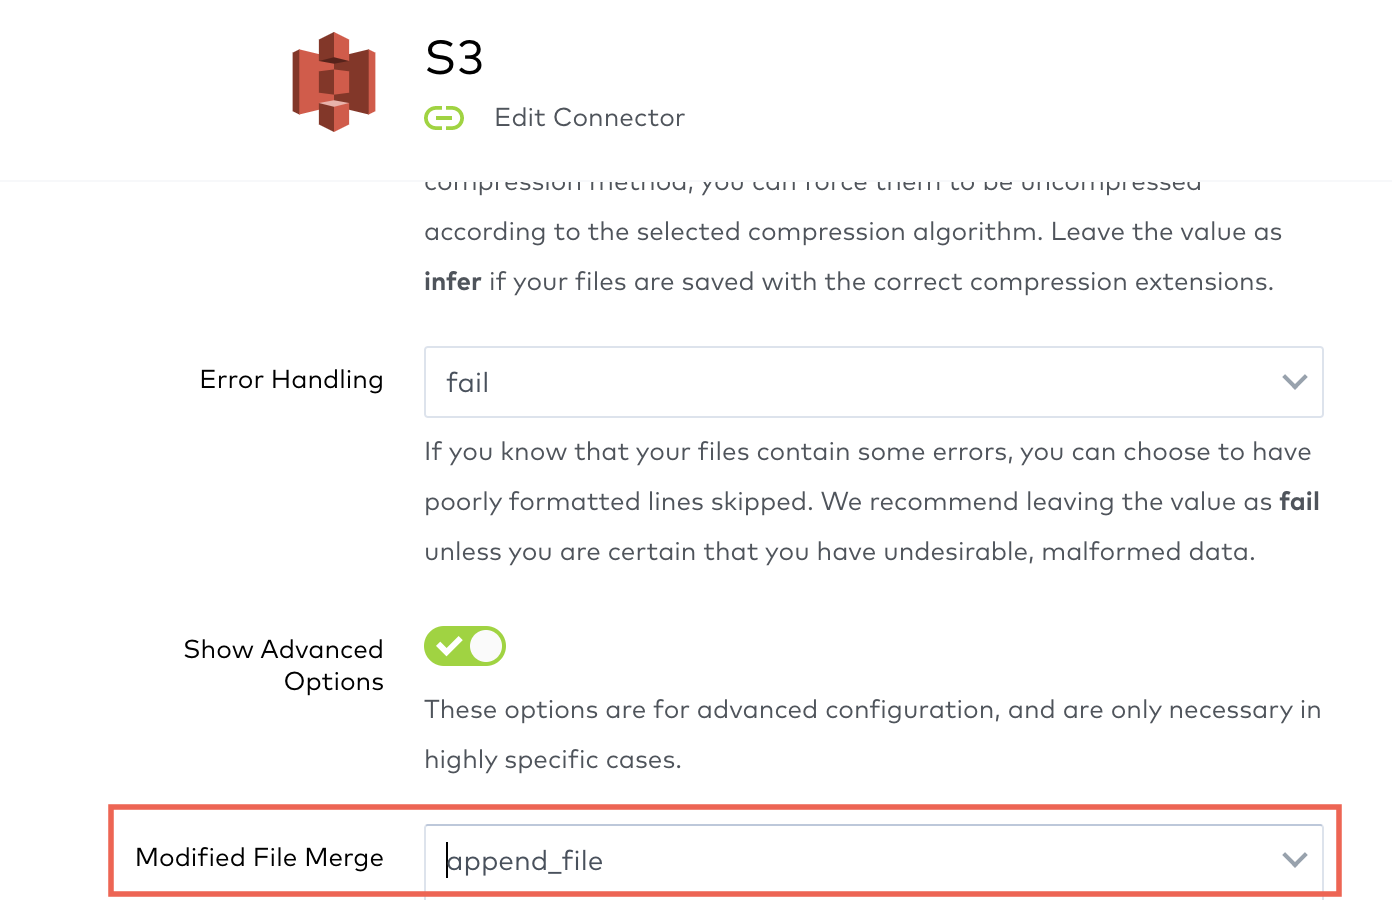 Set the Modified File Merge value to upsert file